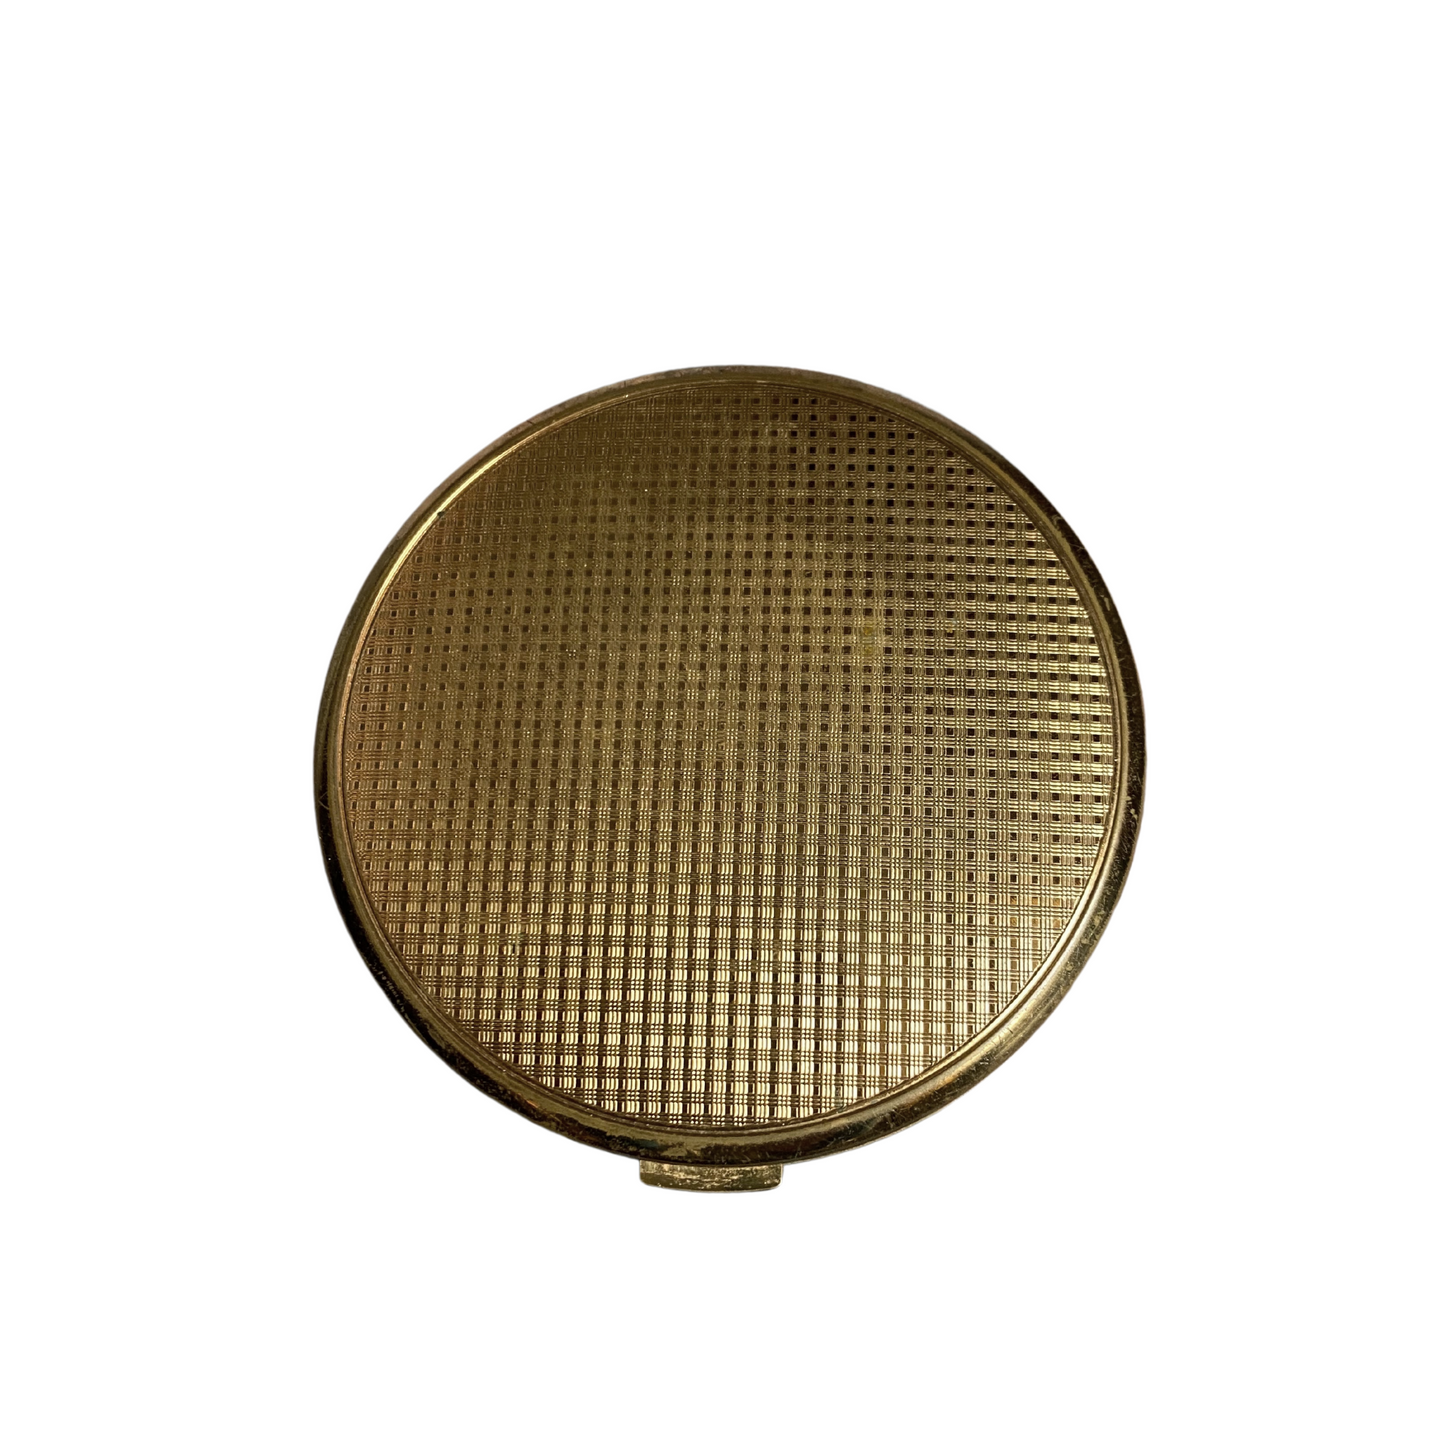 Gold tone cross hatch design on the rear of midcentury vintage Melissa powder compact 